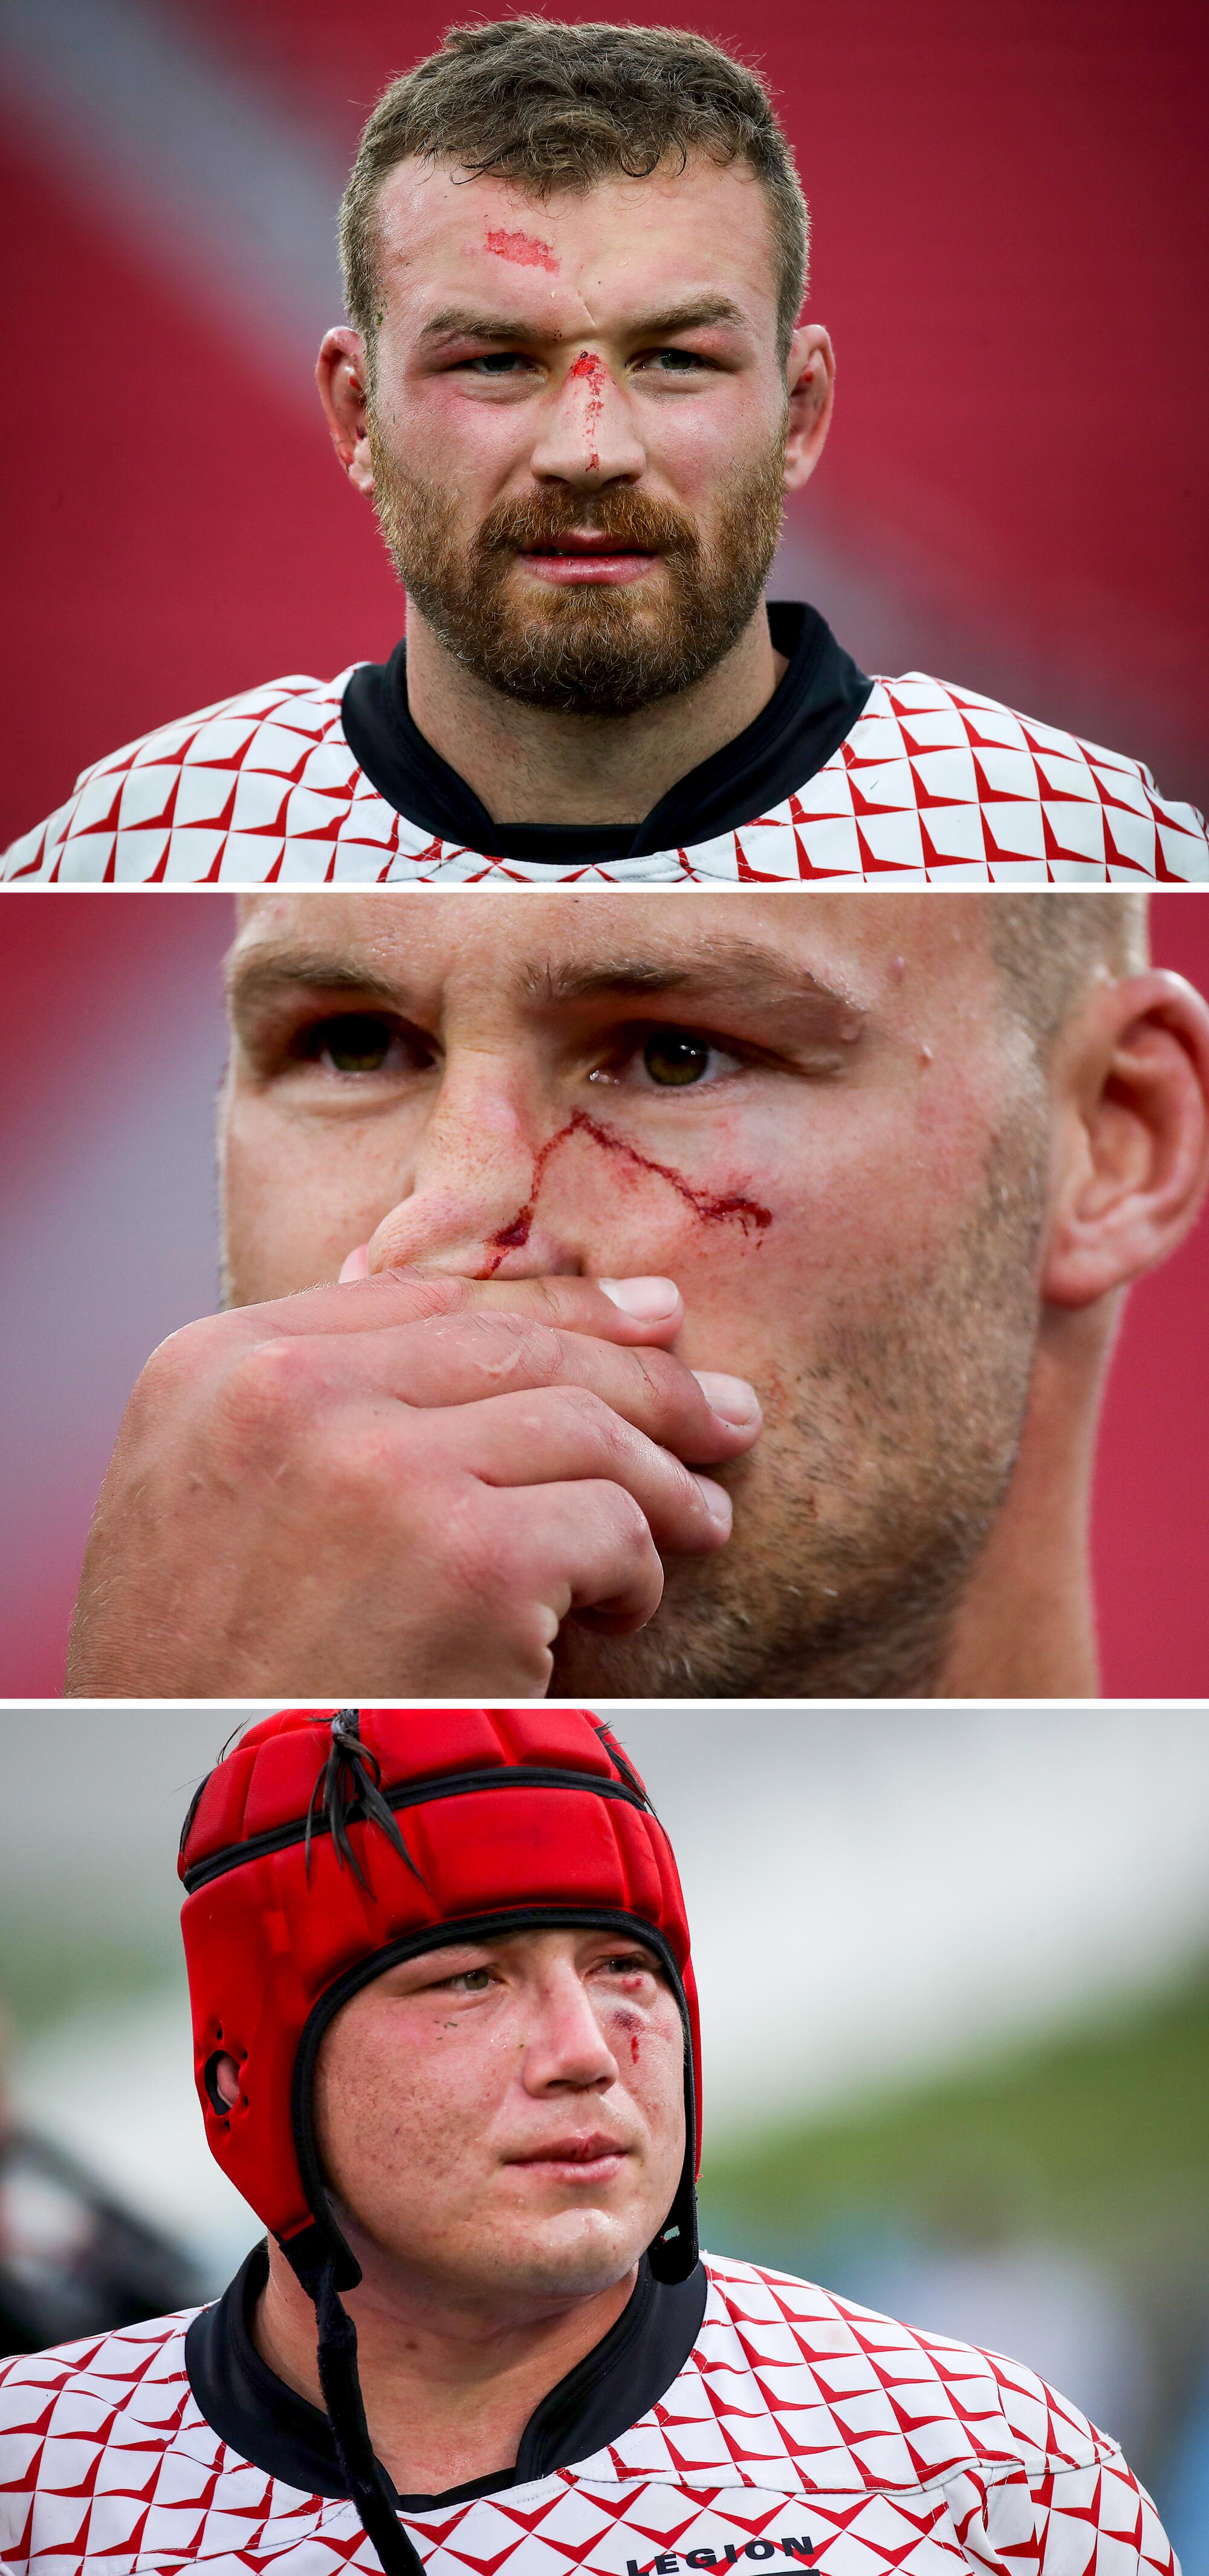  The violence of the battle shows on the faces of rugby players.